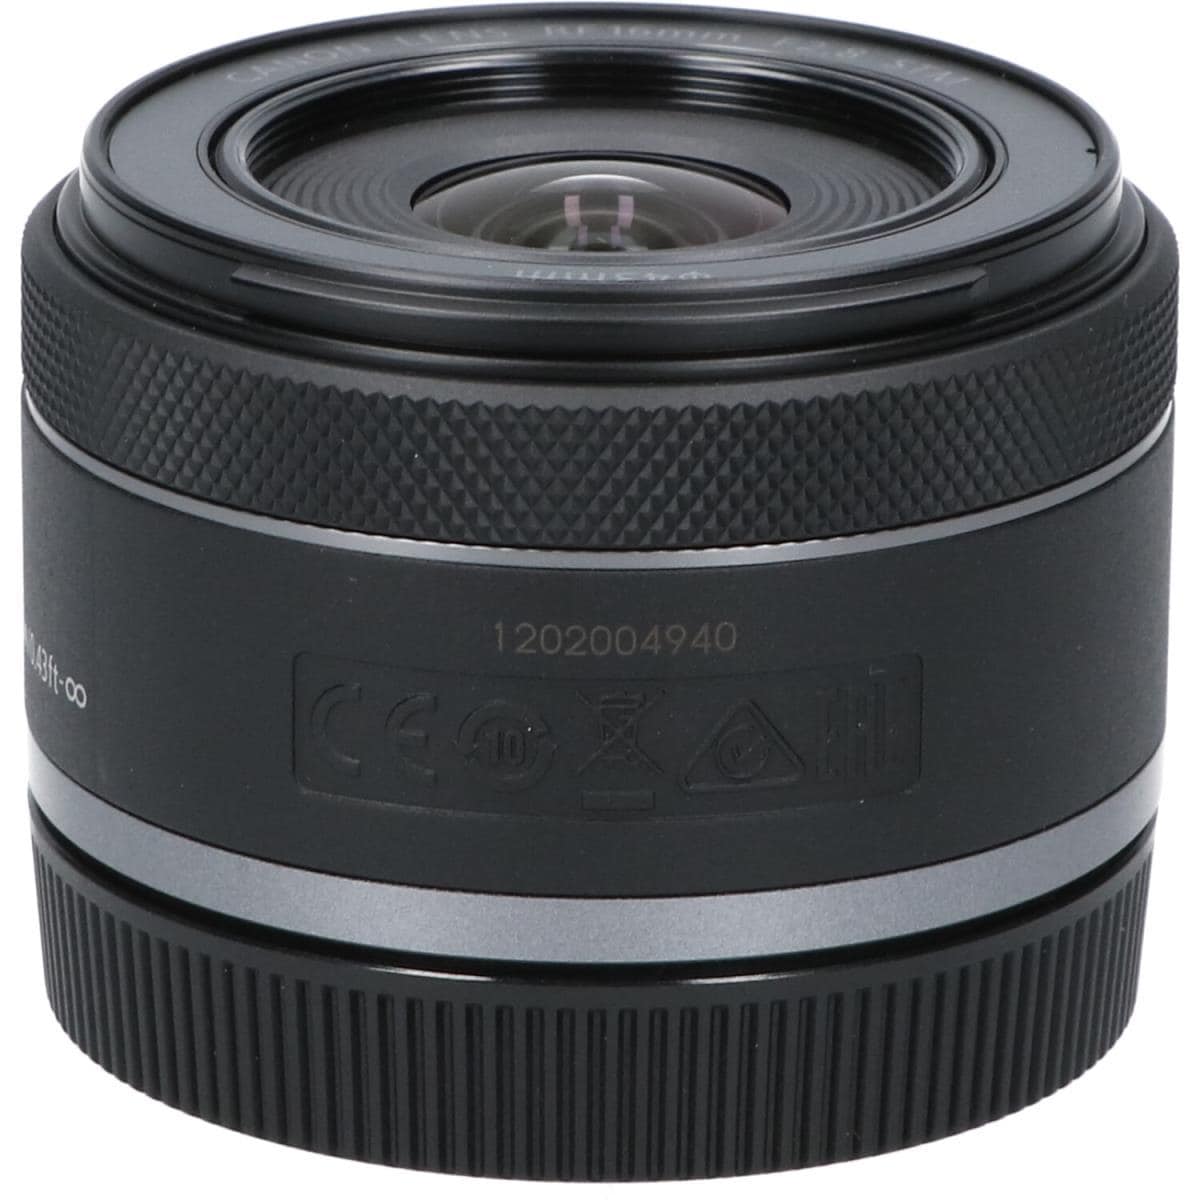 CANON RF16mm F2.8STM